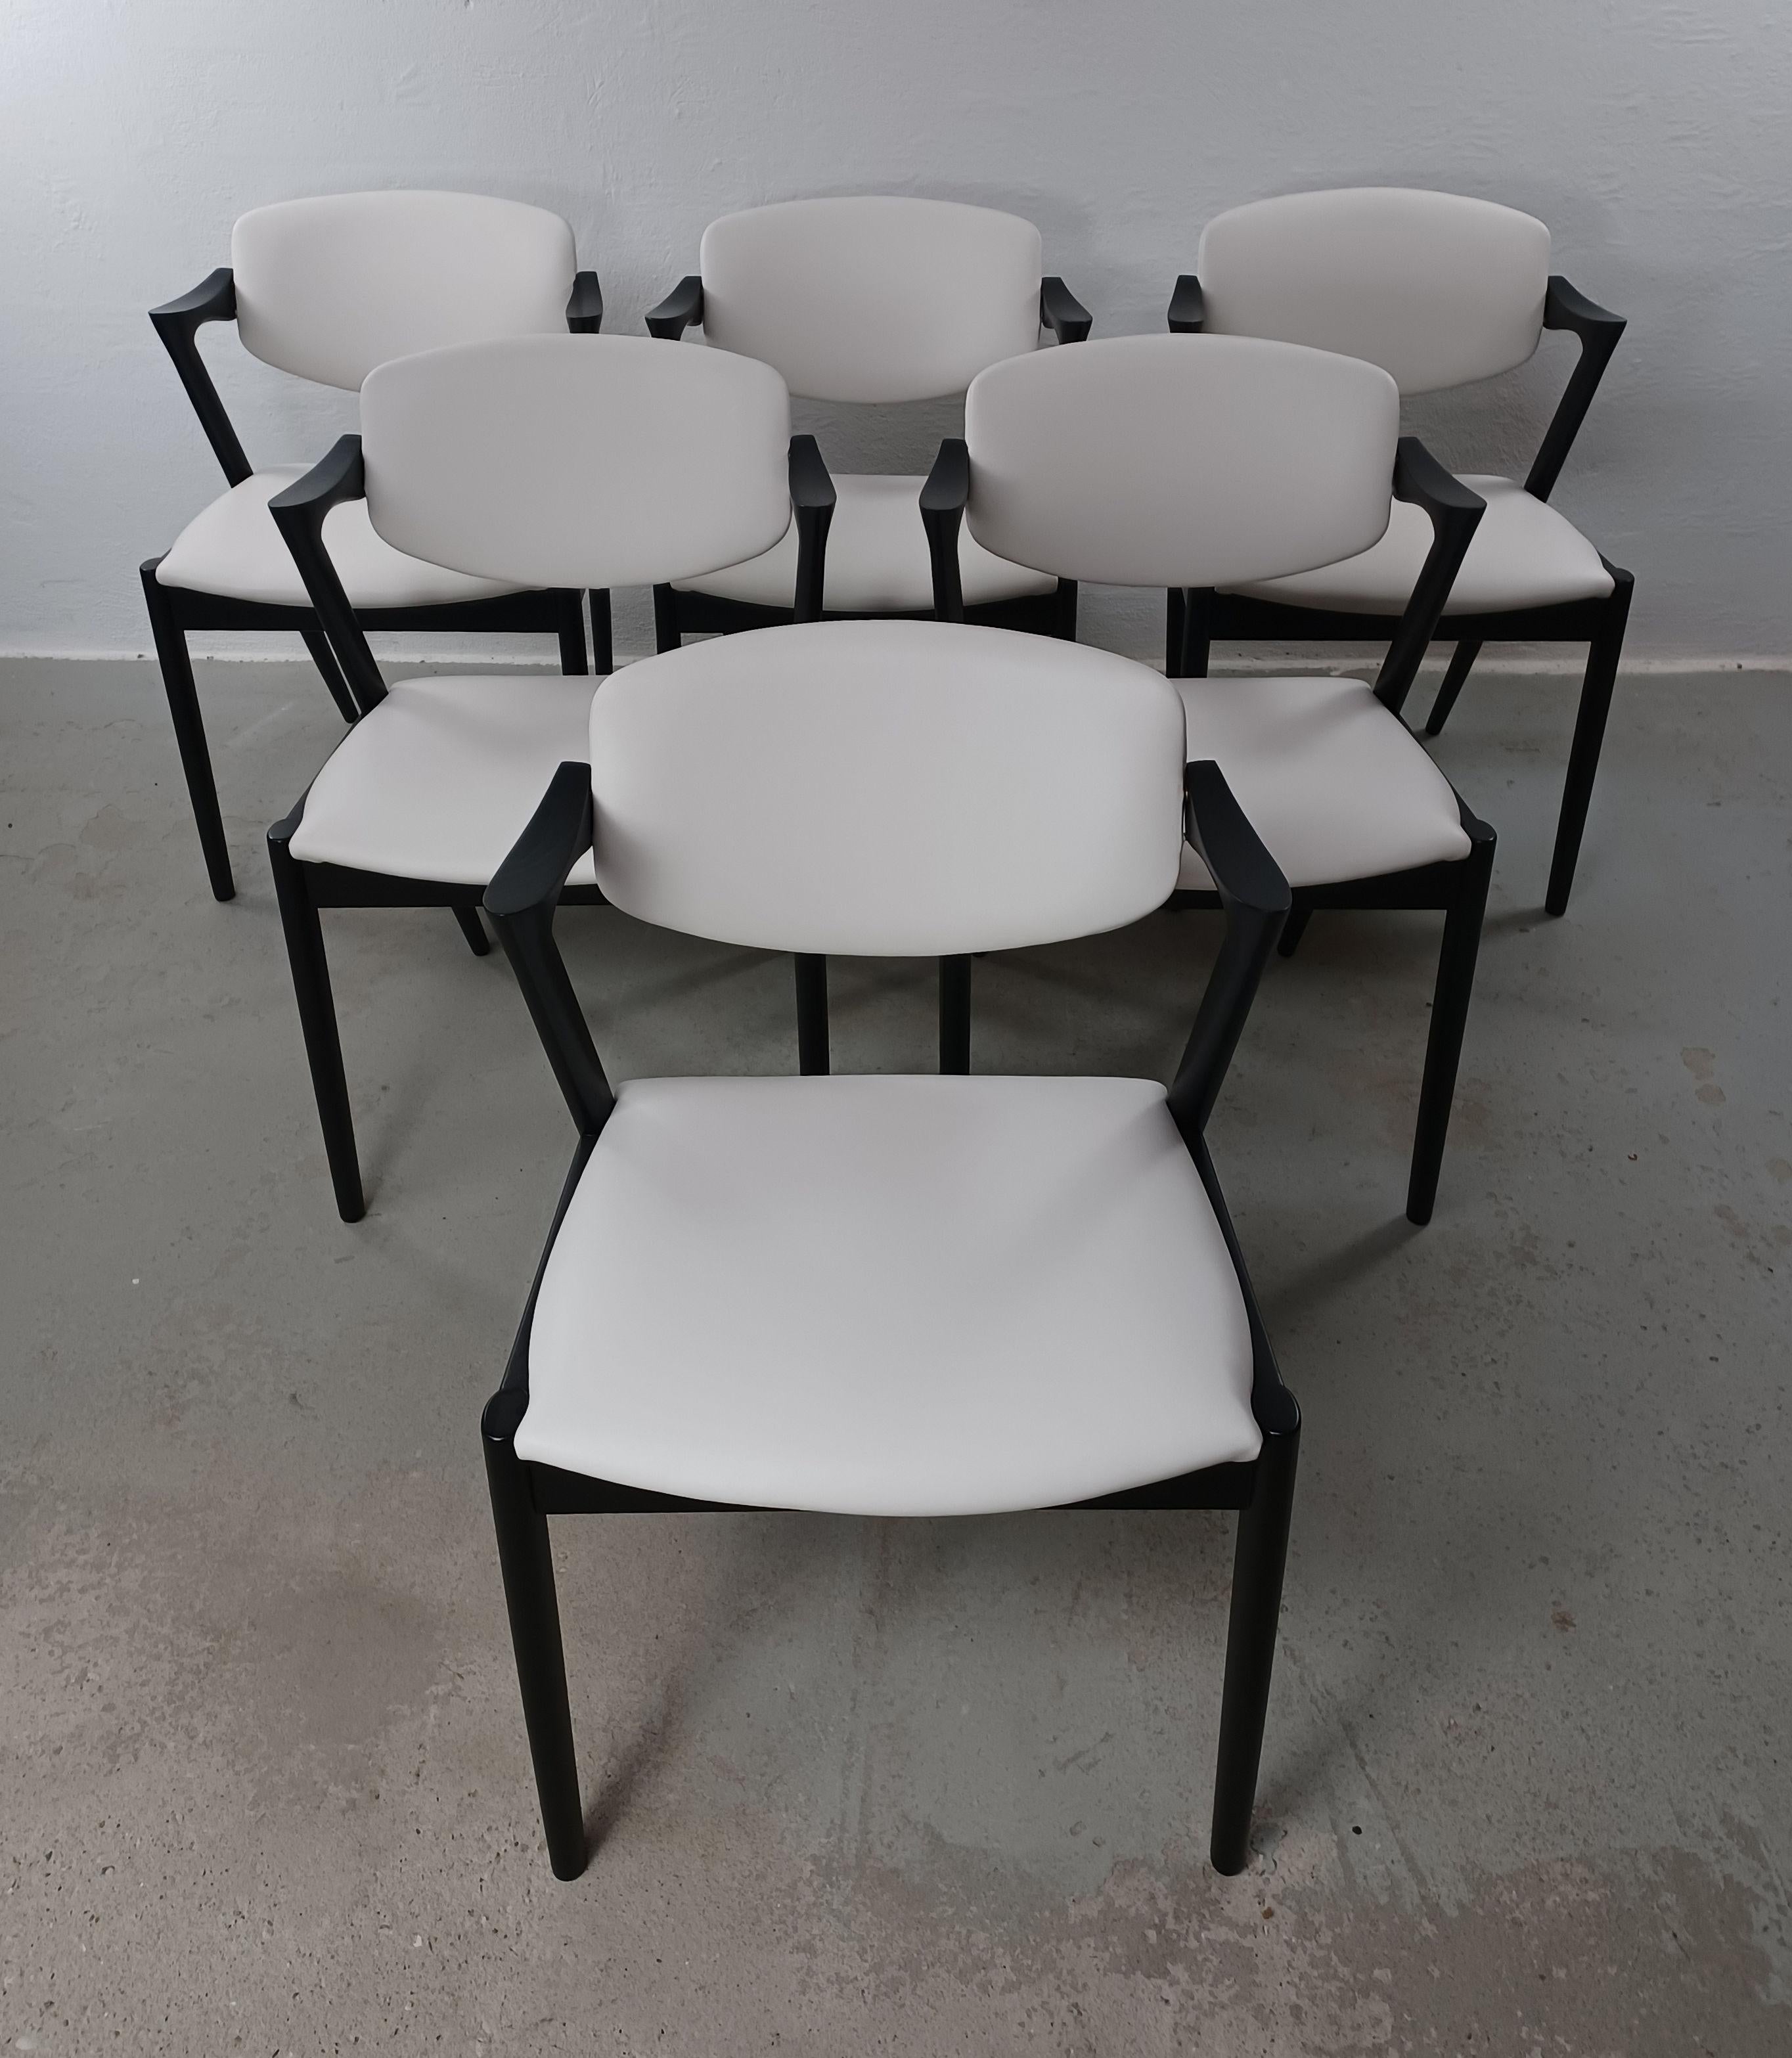 Set of 6 fully restored model 42 oak dining chairs in black varnish with swivel backrests by Kai Kristiansen for Schous Møbelfabrik., inc. custom upholstery.

The chairs have Kai Kristiansens typical light and elegant design that make them fit in